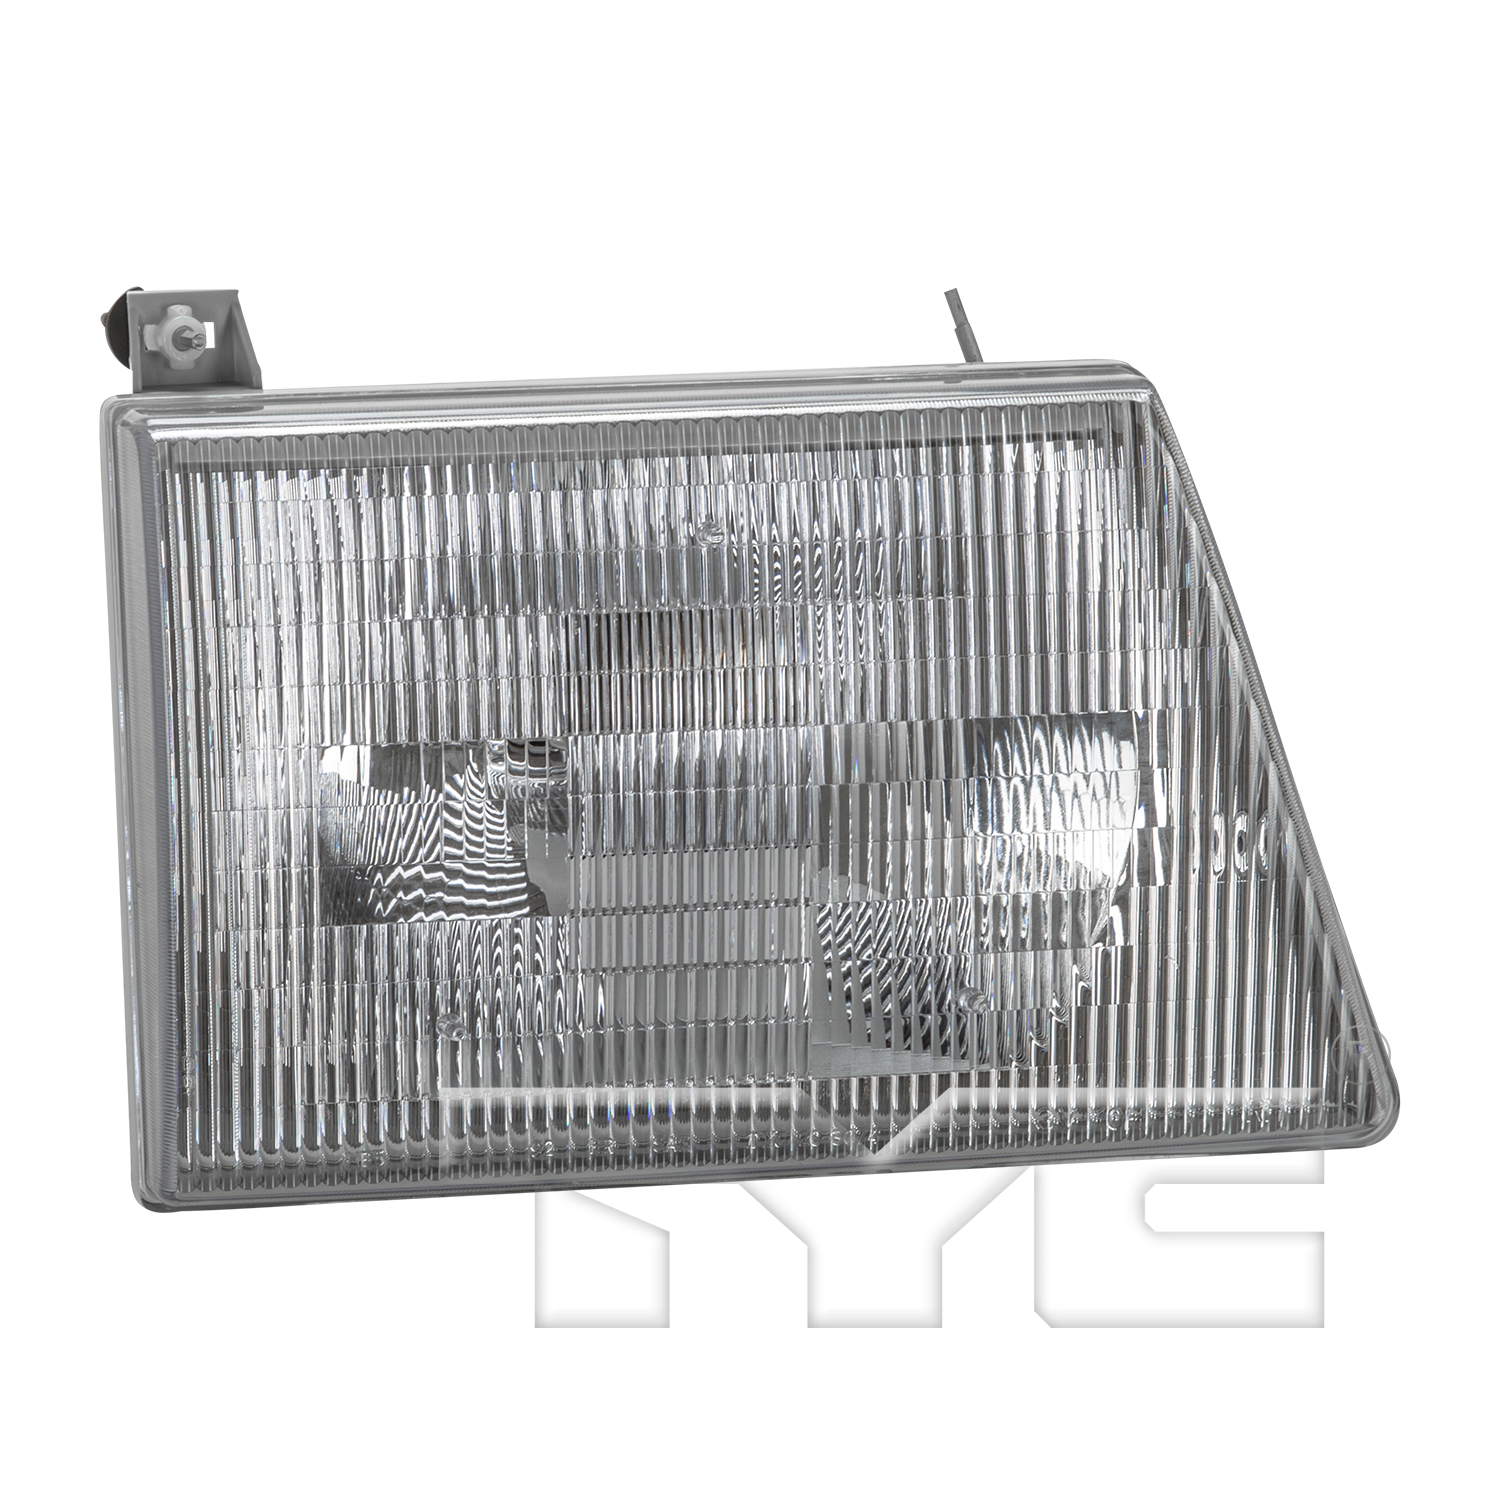 Aftermarket HEADLIGHTS for FORD - E-350 ECONOLINE CLUB WAGON, E-350 ECONOLINE CLUB WAGON,92-96,RT Headlamp assy composite